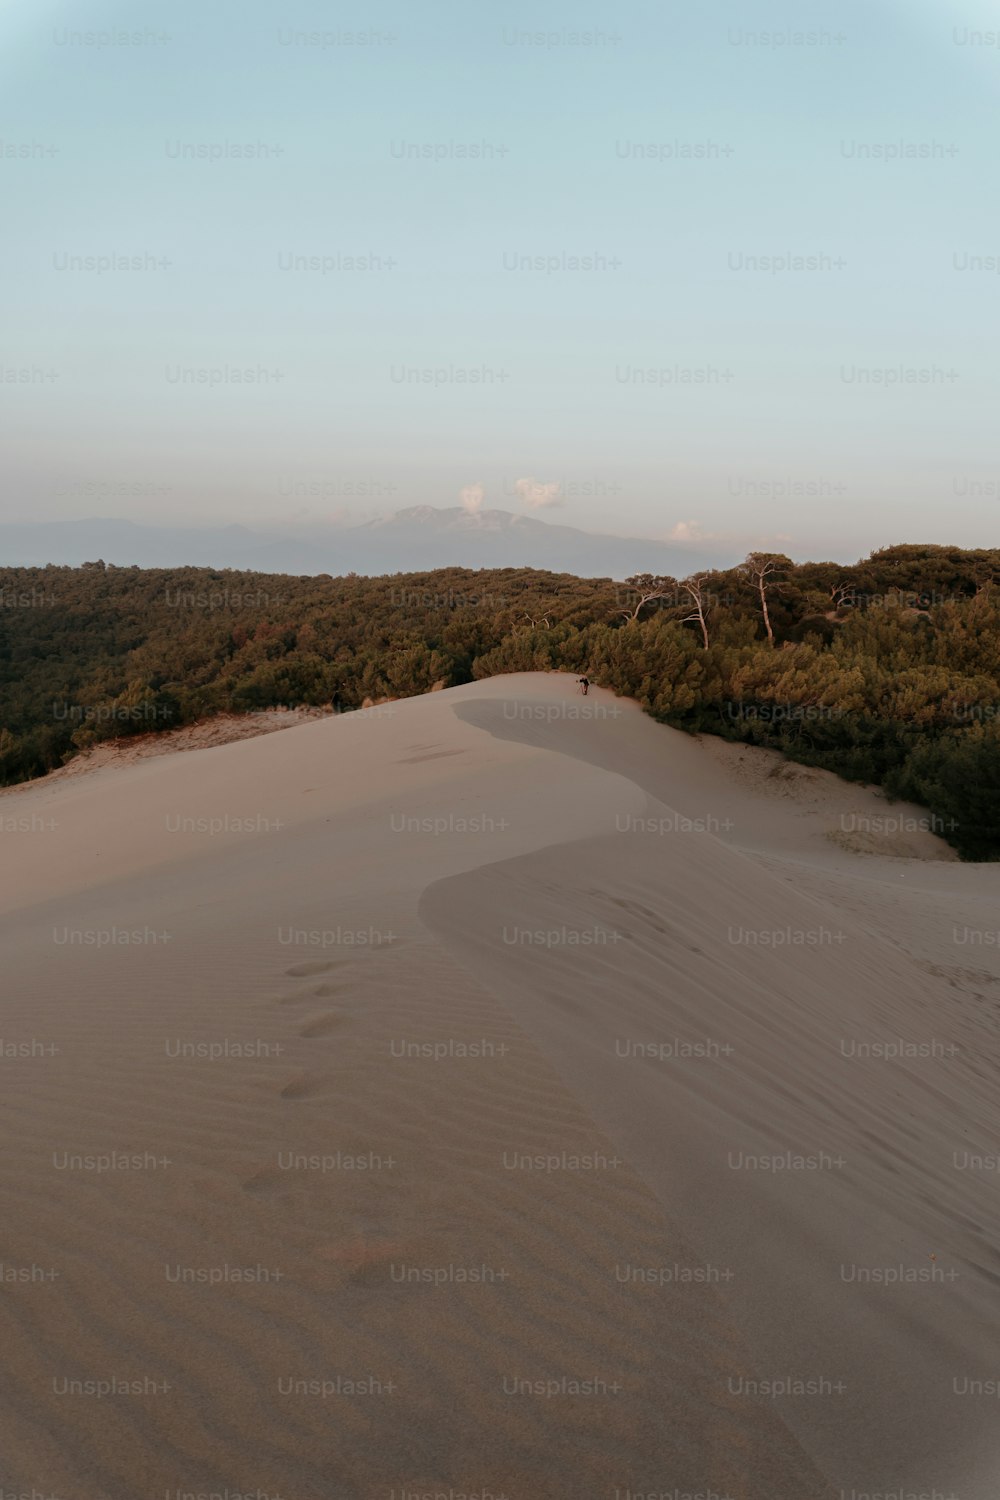 a large sand dune with trees in the background